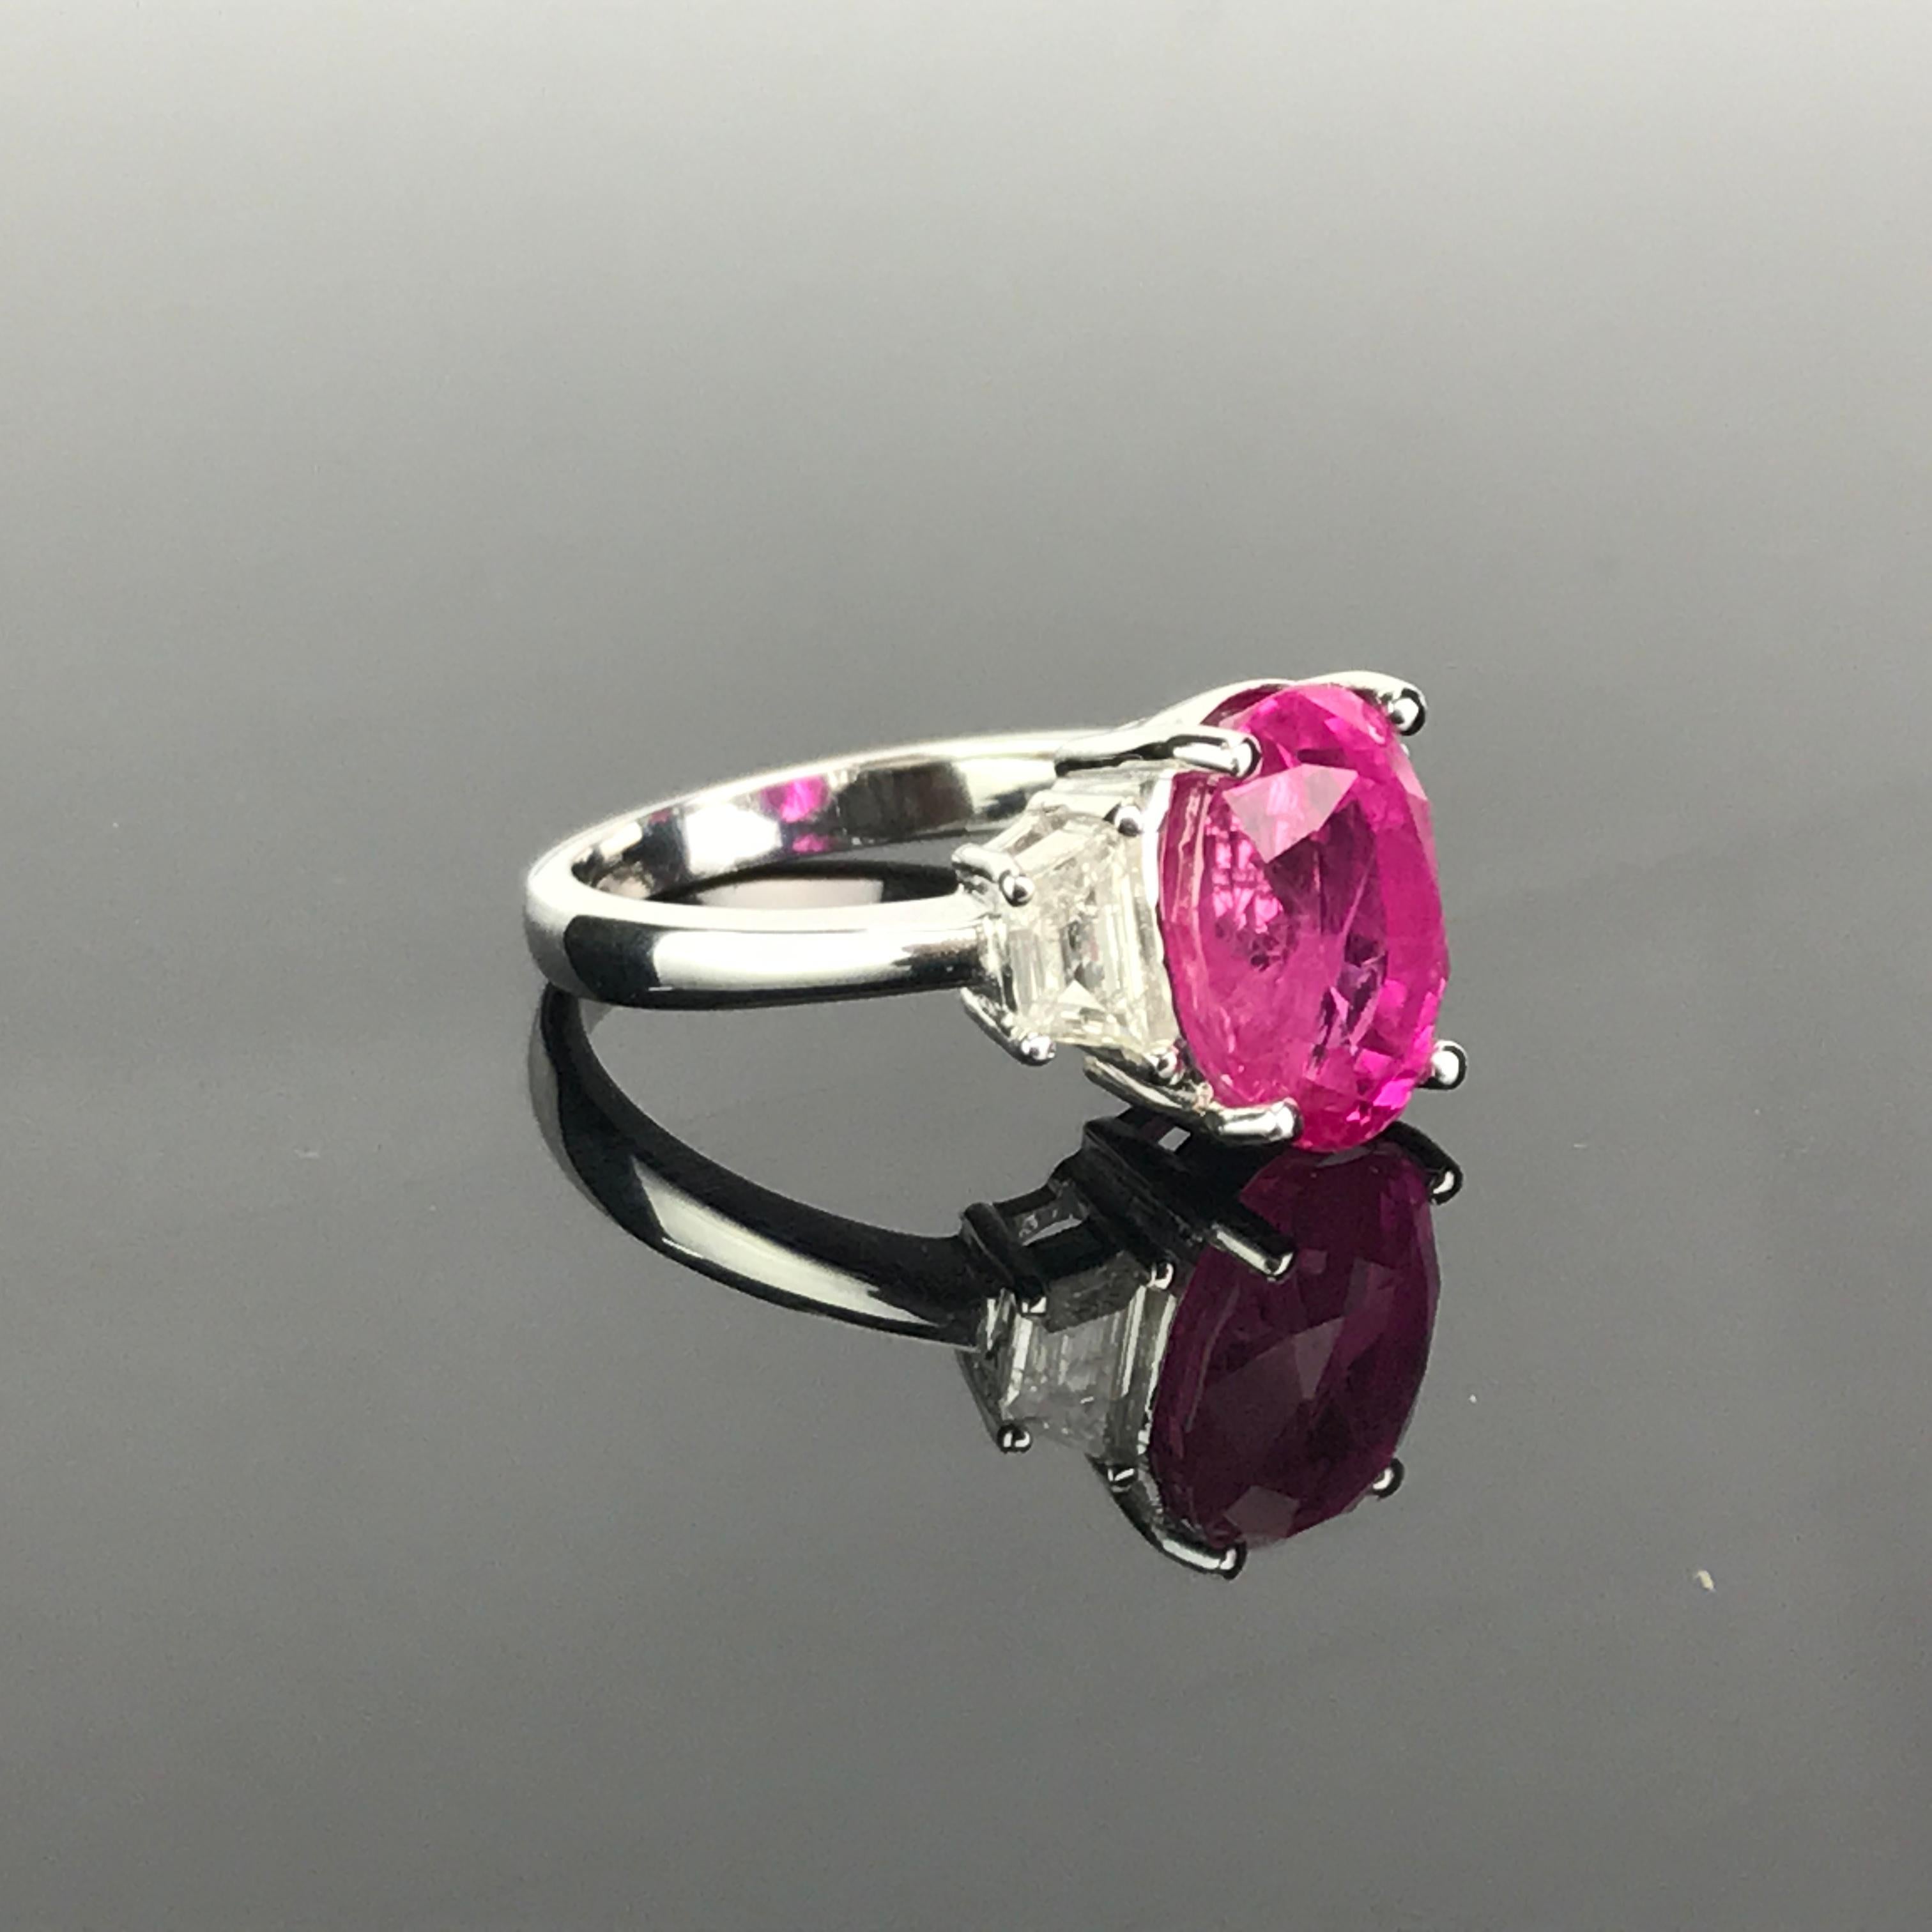 A classic 6.23 carat Burmese Ruby and Diamond three-stone engagement ring. This natural ruby has a beautiful pink-ish color, and great luster to it. The VS quality, H color Diamond Trapeze are a total of 0.44 carats. All set in 4.60 grams of 18K